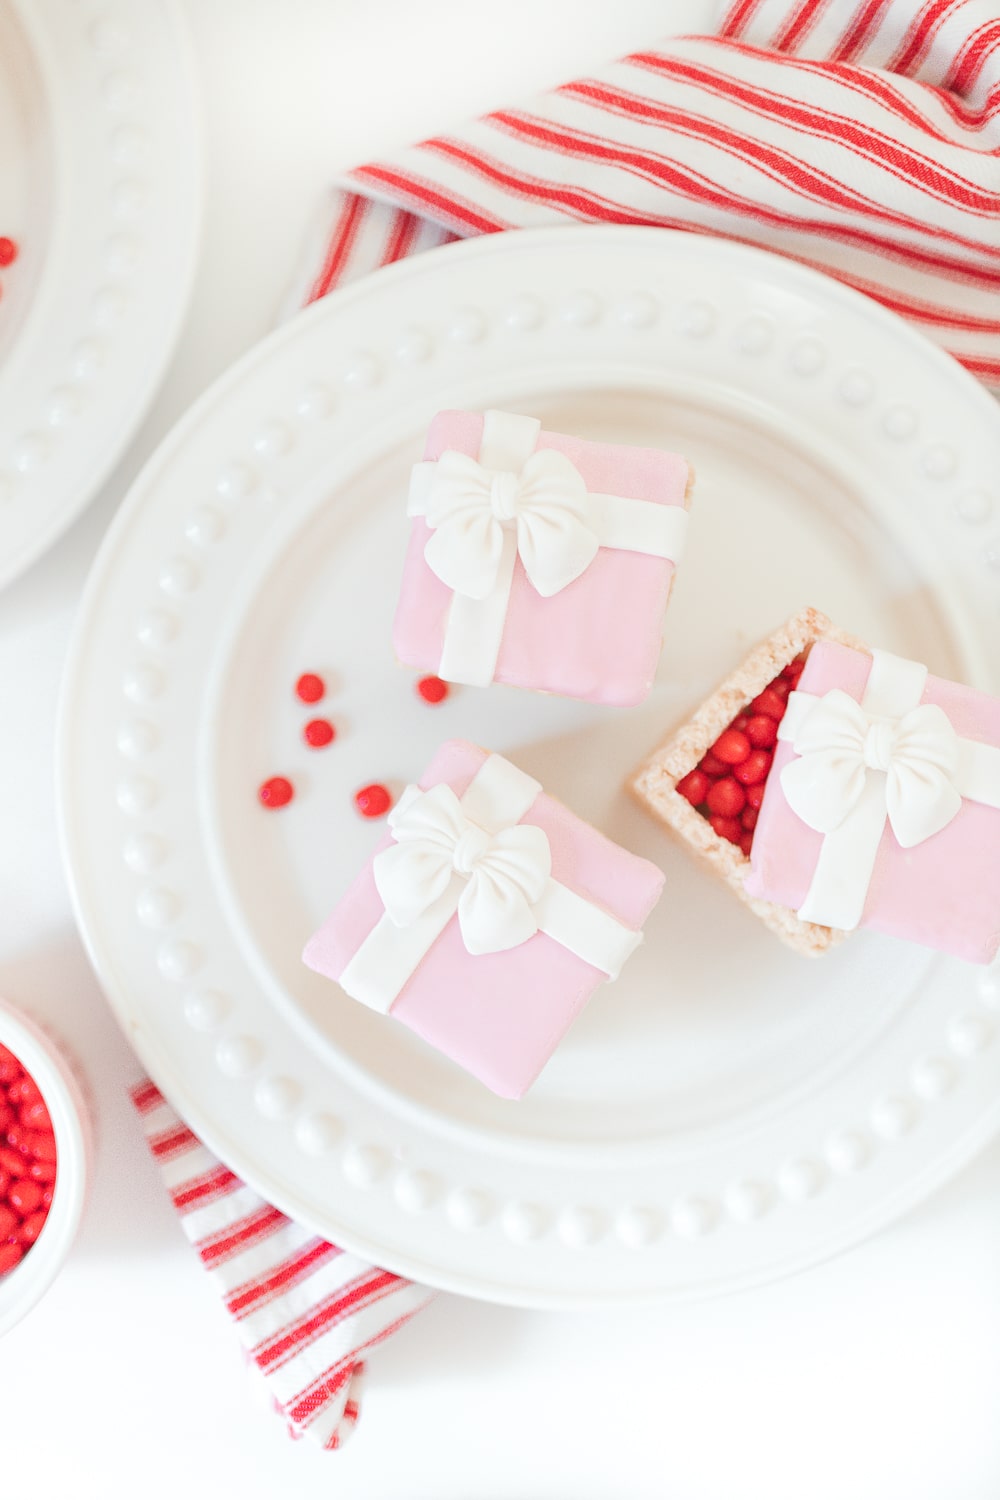 Southern lifestyle blogger Stephanie Ziajka shows how to make Christmas rice krispie treats that look like mini gift boxes on Diary of a Debutante